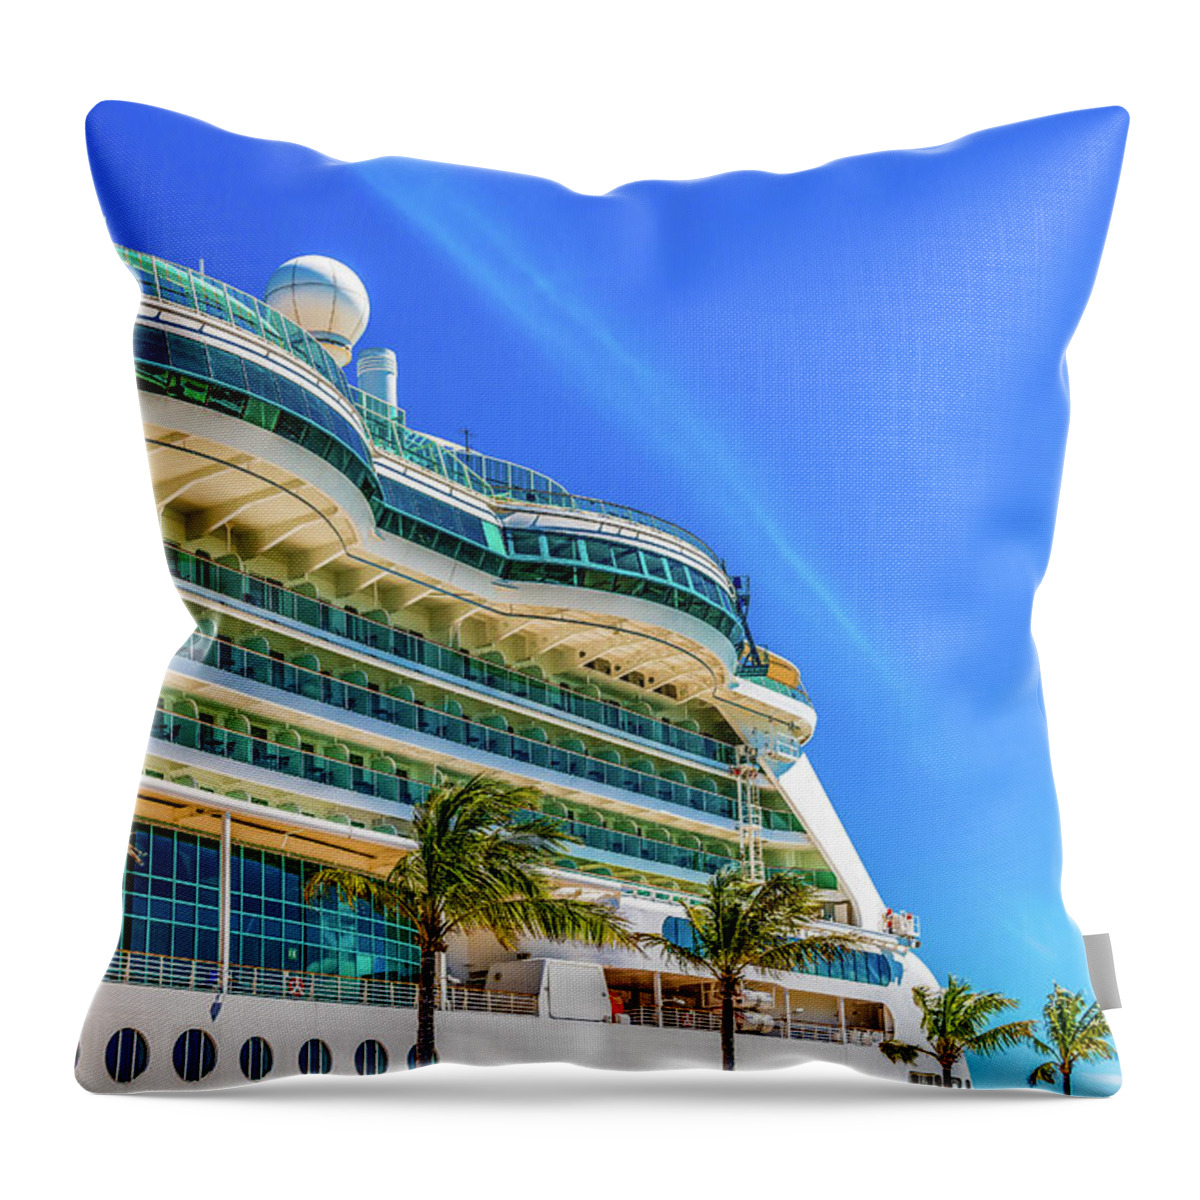 Beautiful Throw Pillow featuring the photograph Curved Glass Over Balconies on Luxury Cruise Ship by Darryl Brooks